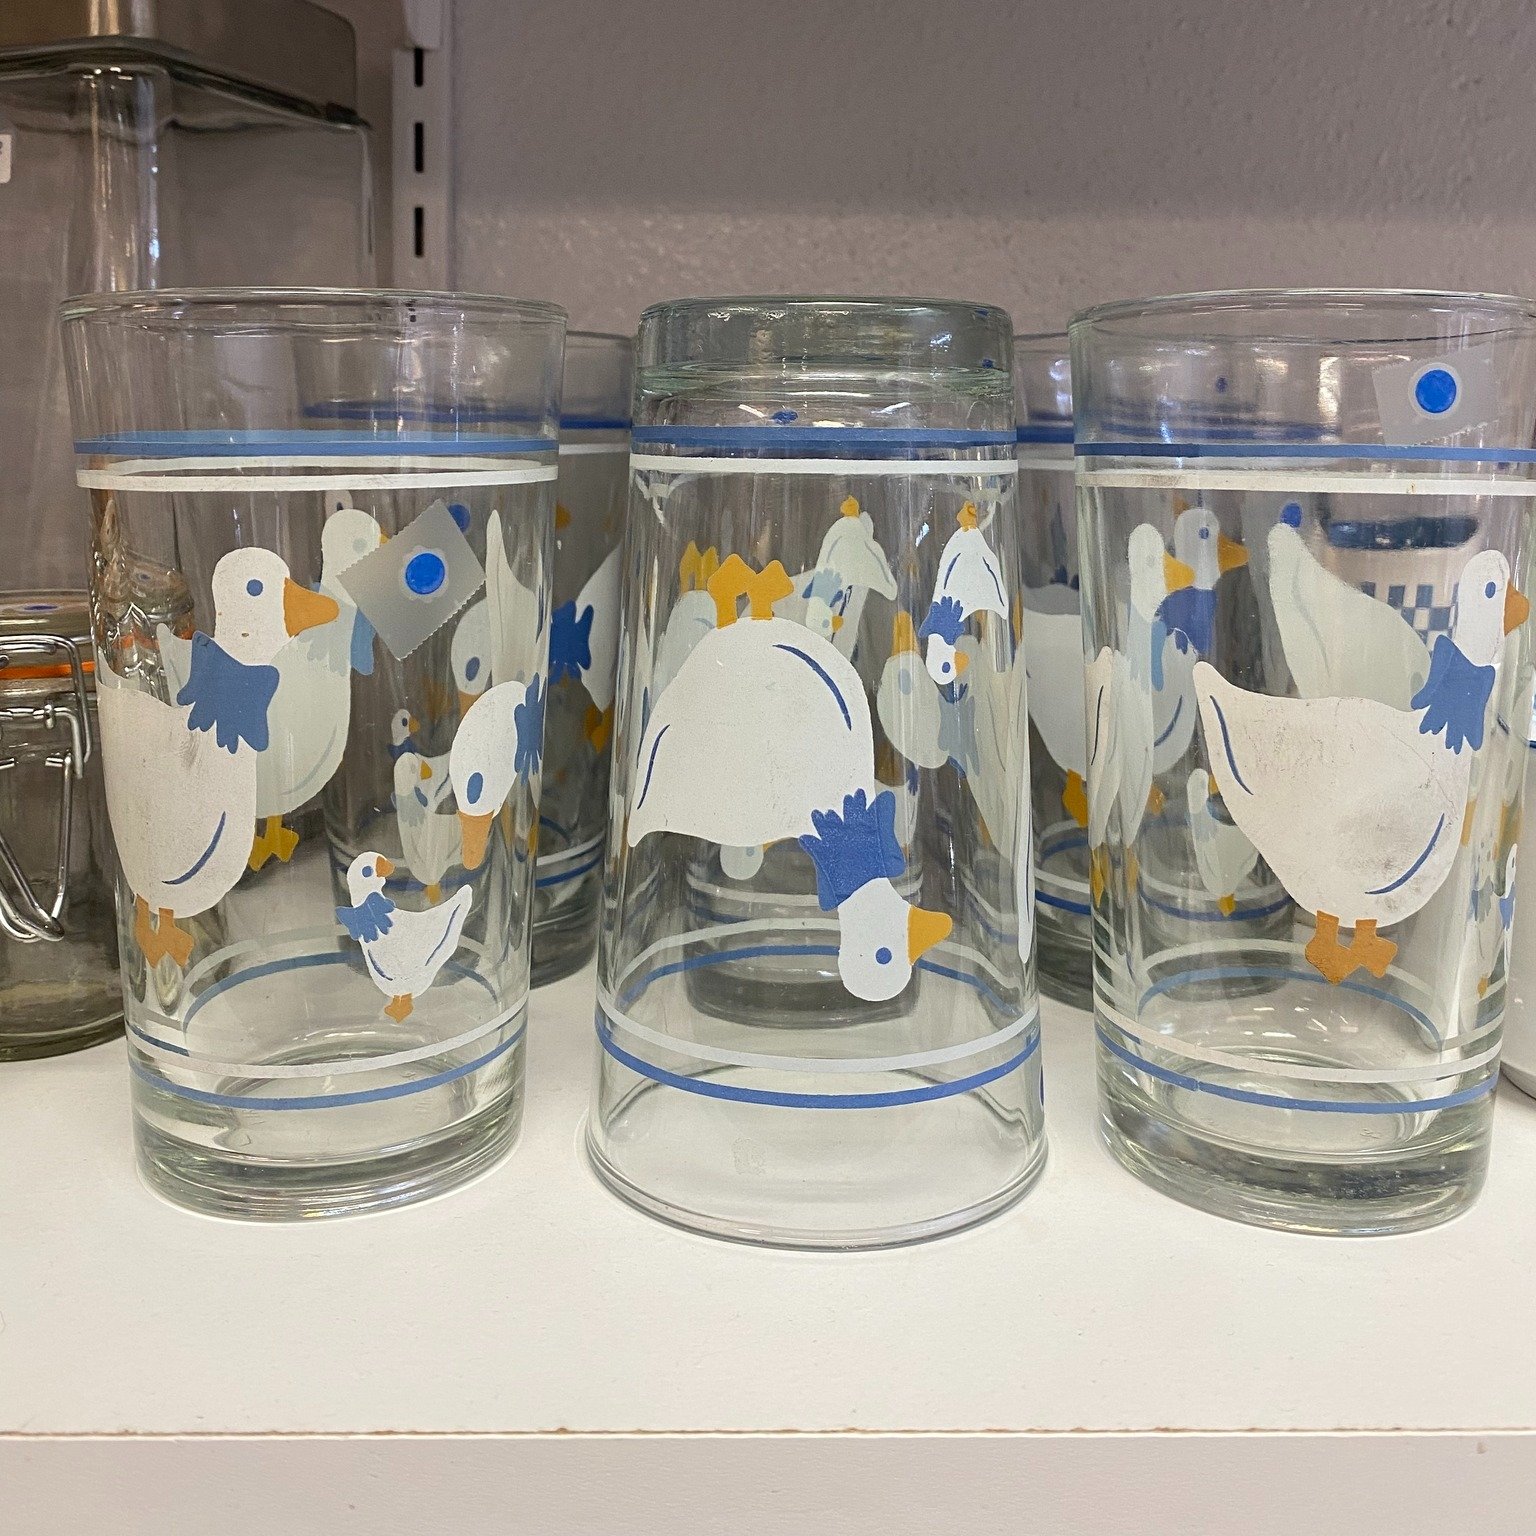 Who else gets immediately transported to the past when they see these? 🦆

#secondhandfashion #sustainabilitymatters #thriftedfinds #secondhandshop #thriftingdiy #thrifting #upcycling #secondhandfirst #secondhandclothes #thriftflip #vintageshop #volu